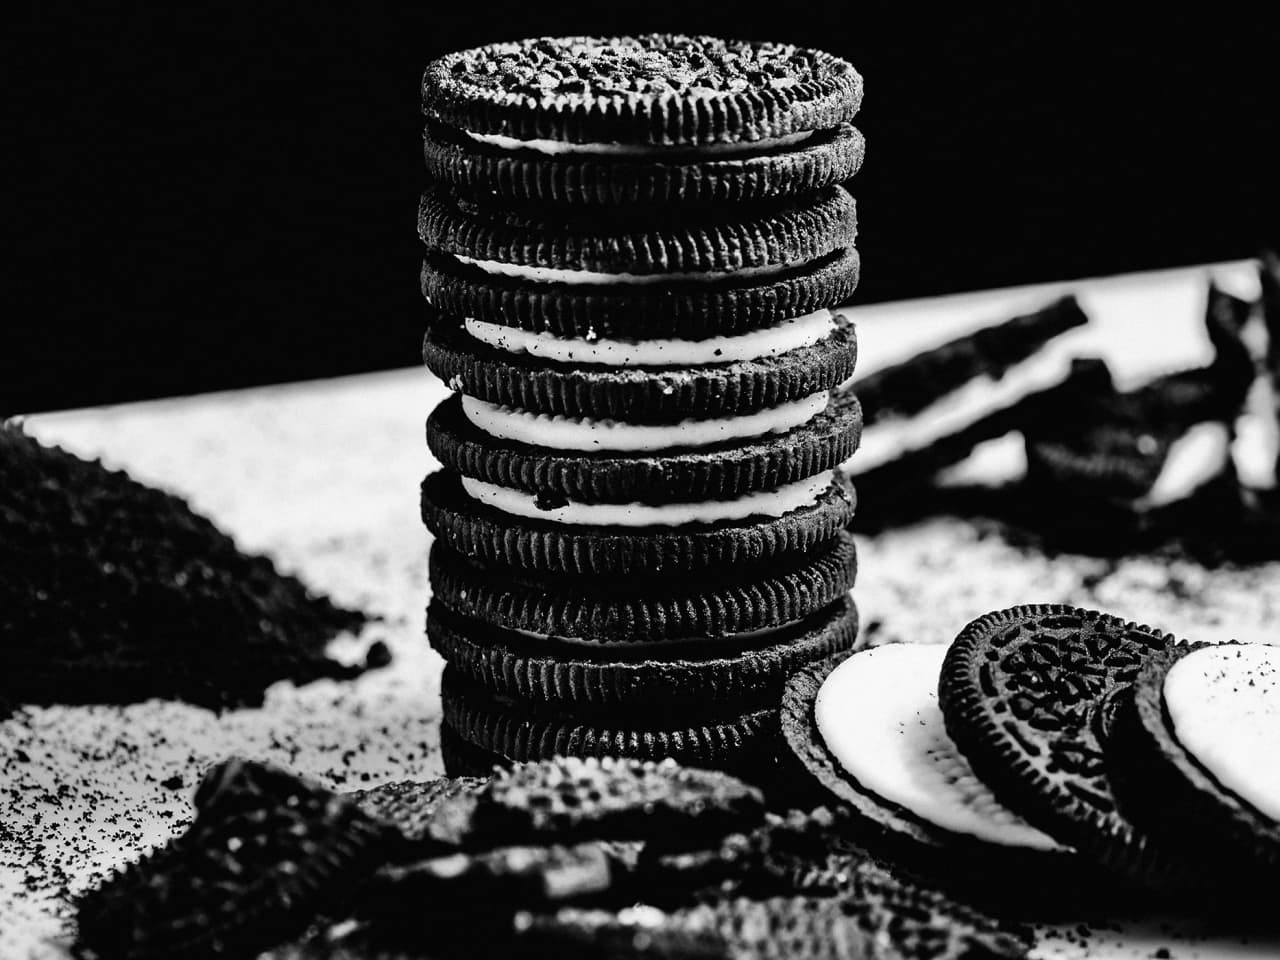 Dividend Increases Are Expected From Oreo Maker Mondelez and 3 Others